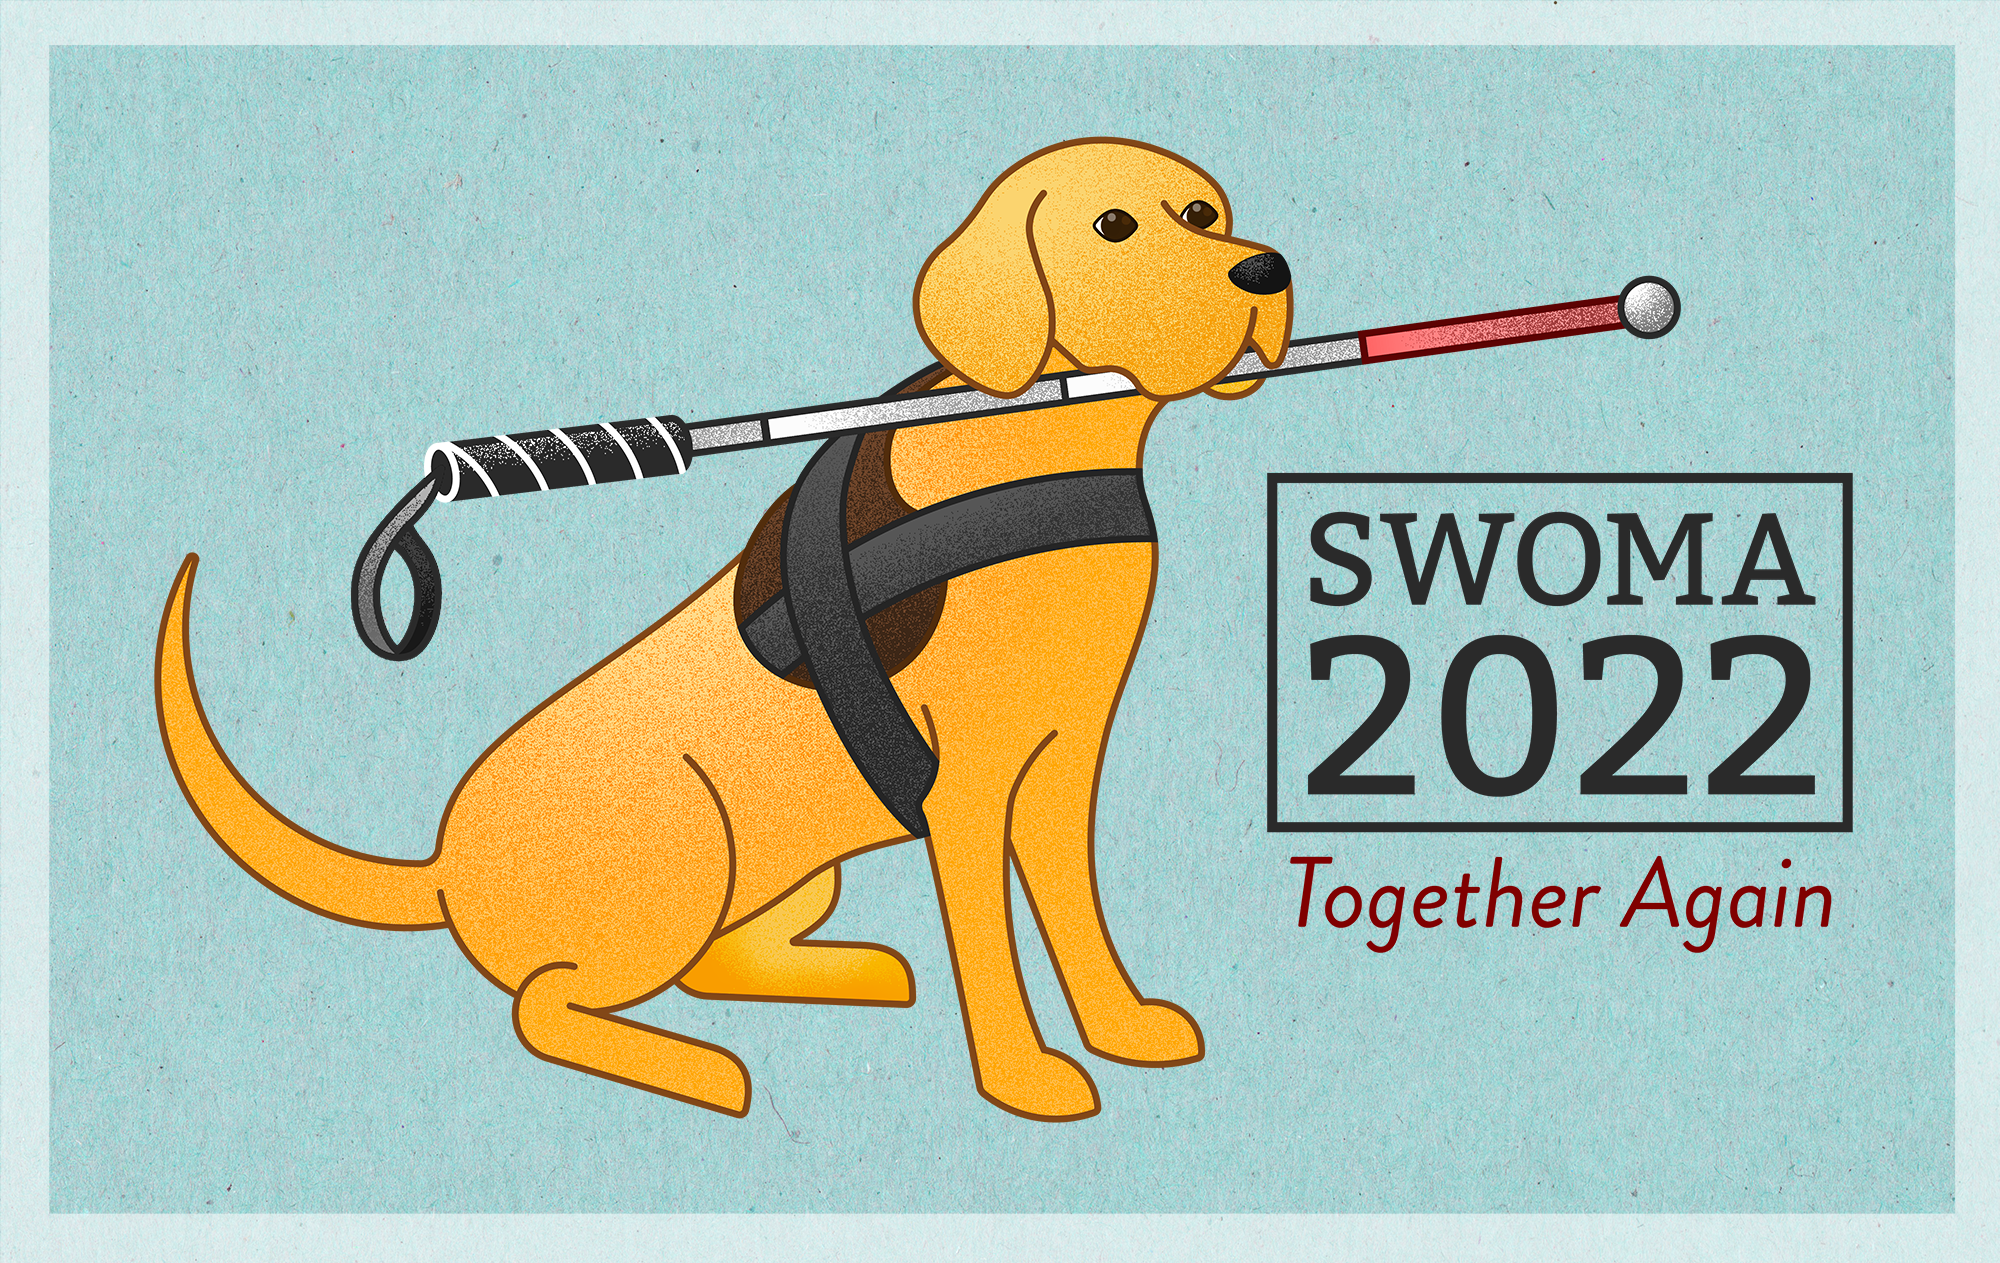 swoma22-guide-dog-white-cane-logo-paper-background.png